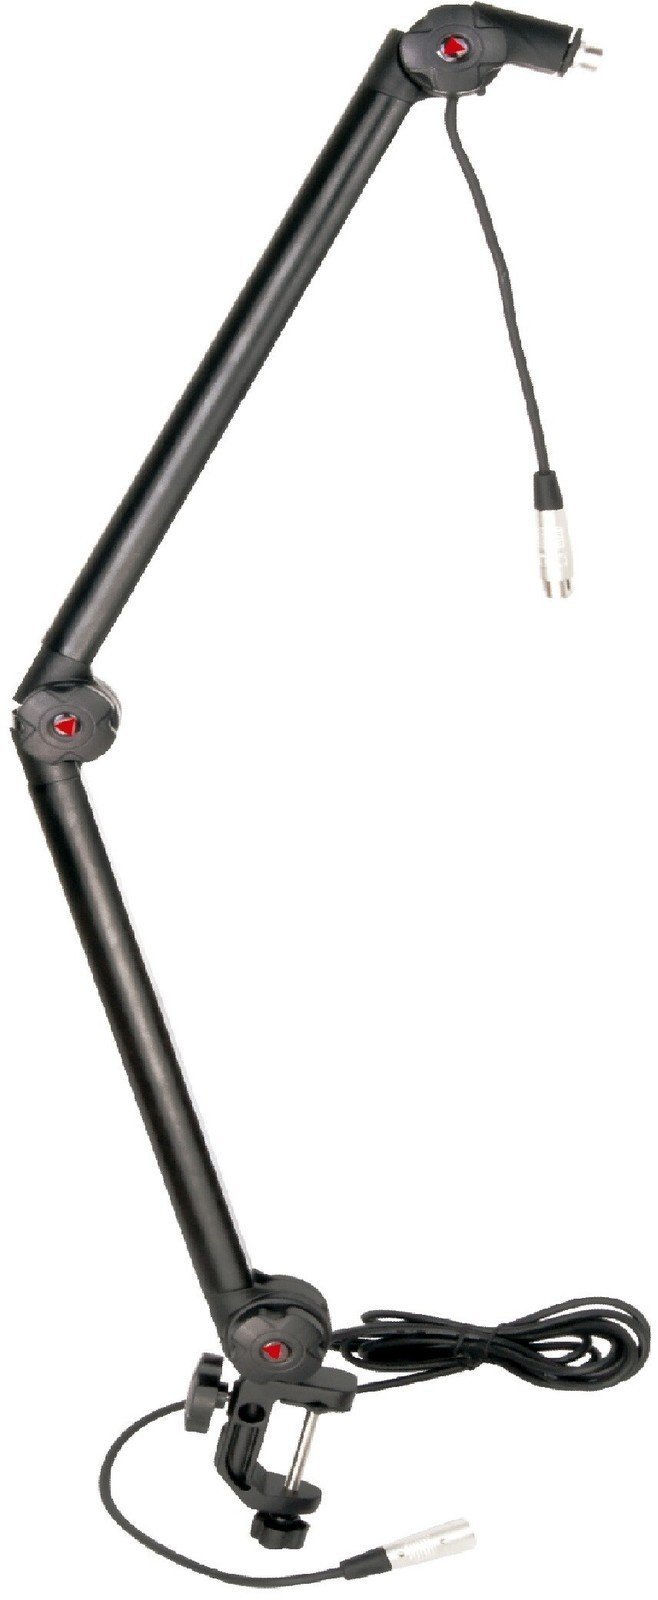 Desk Microphone Stand Alctron MA614B Desk Microphone Stand